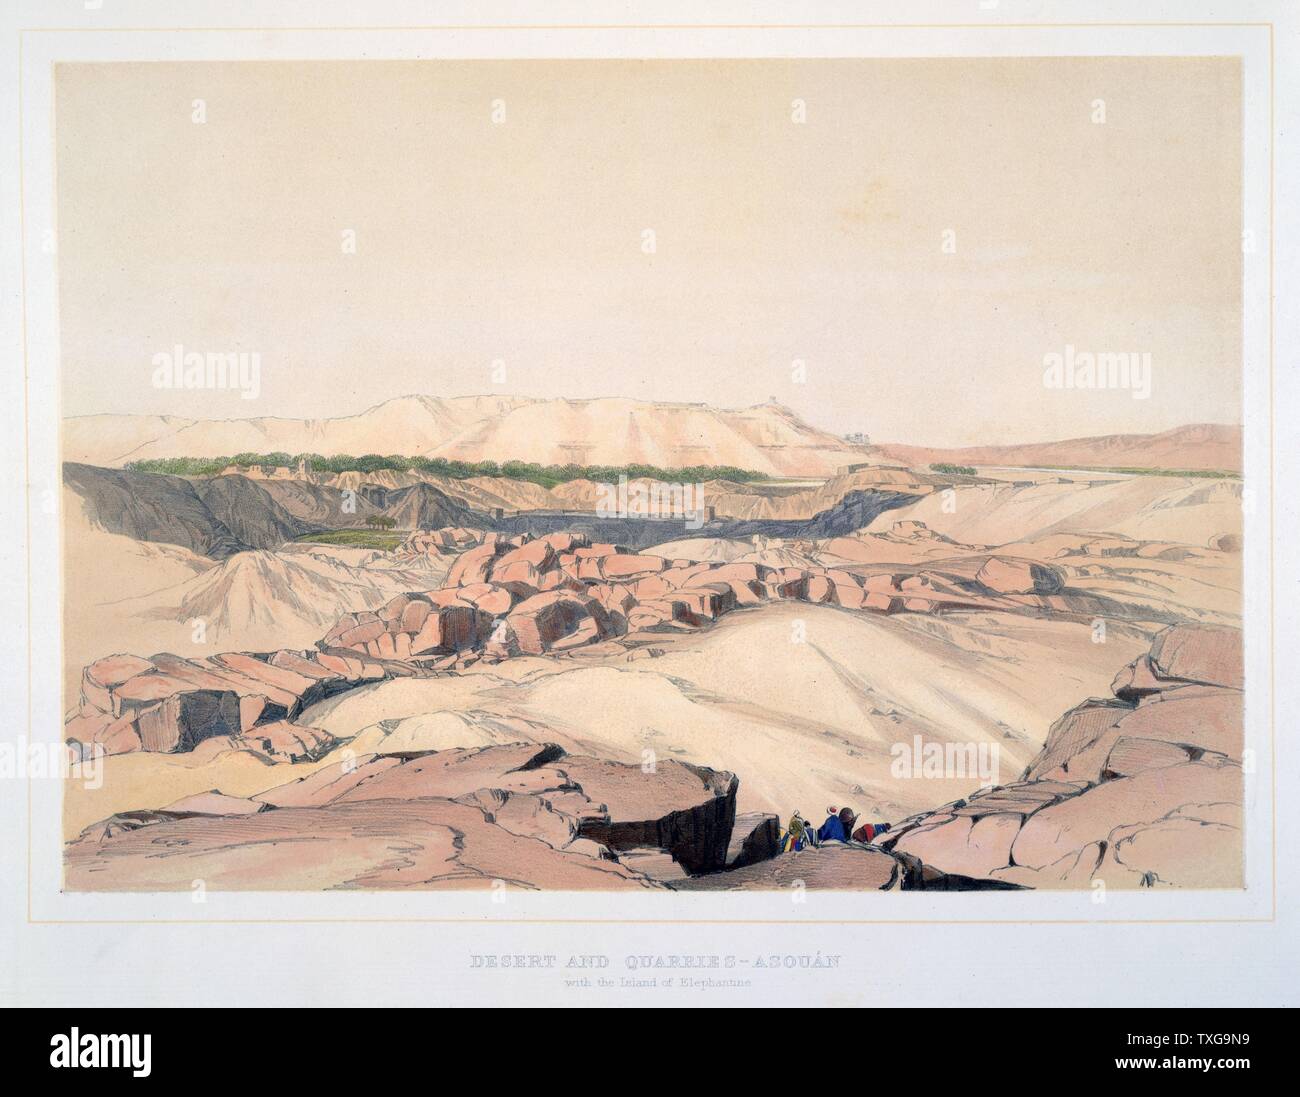 Desert and quarries, Aswan, with the Island of Elephantine Lithograph from a watercolour by Lord Wharncliffe Stock Photo